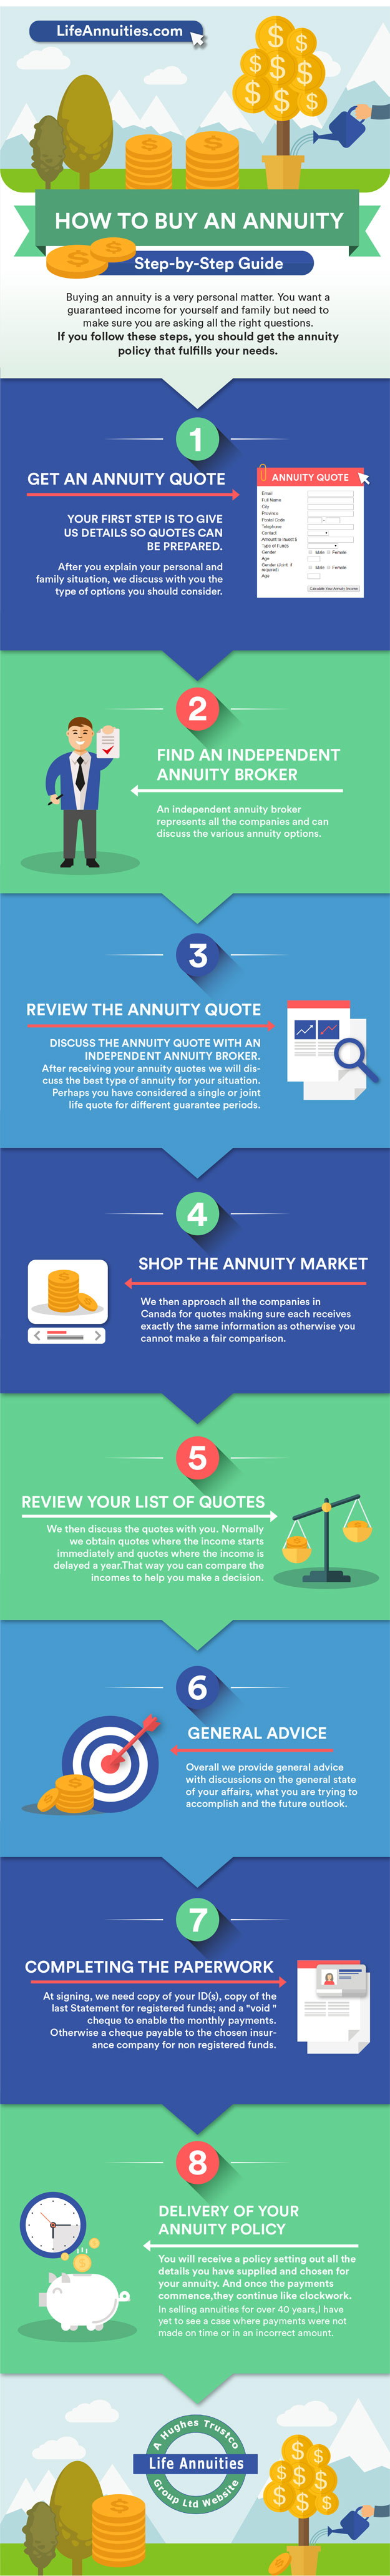 infographic how to buy an annuity